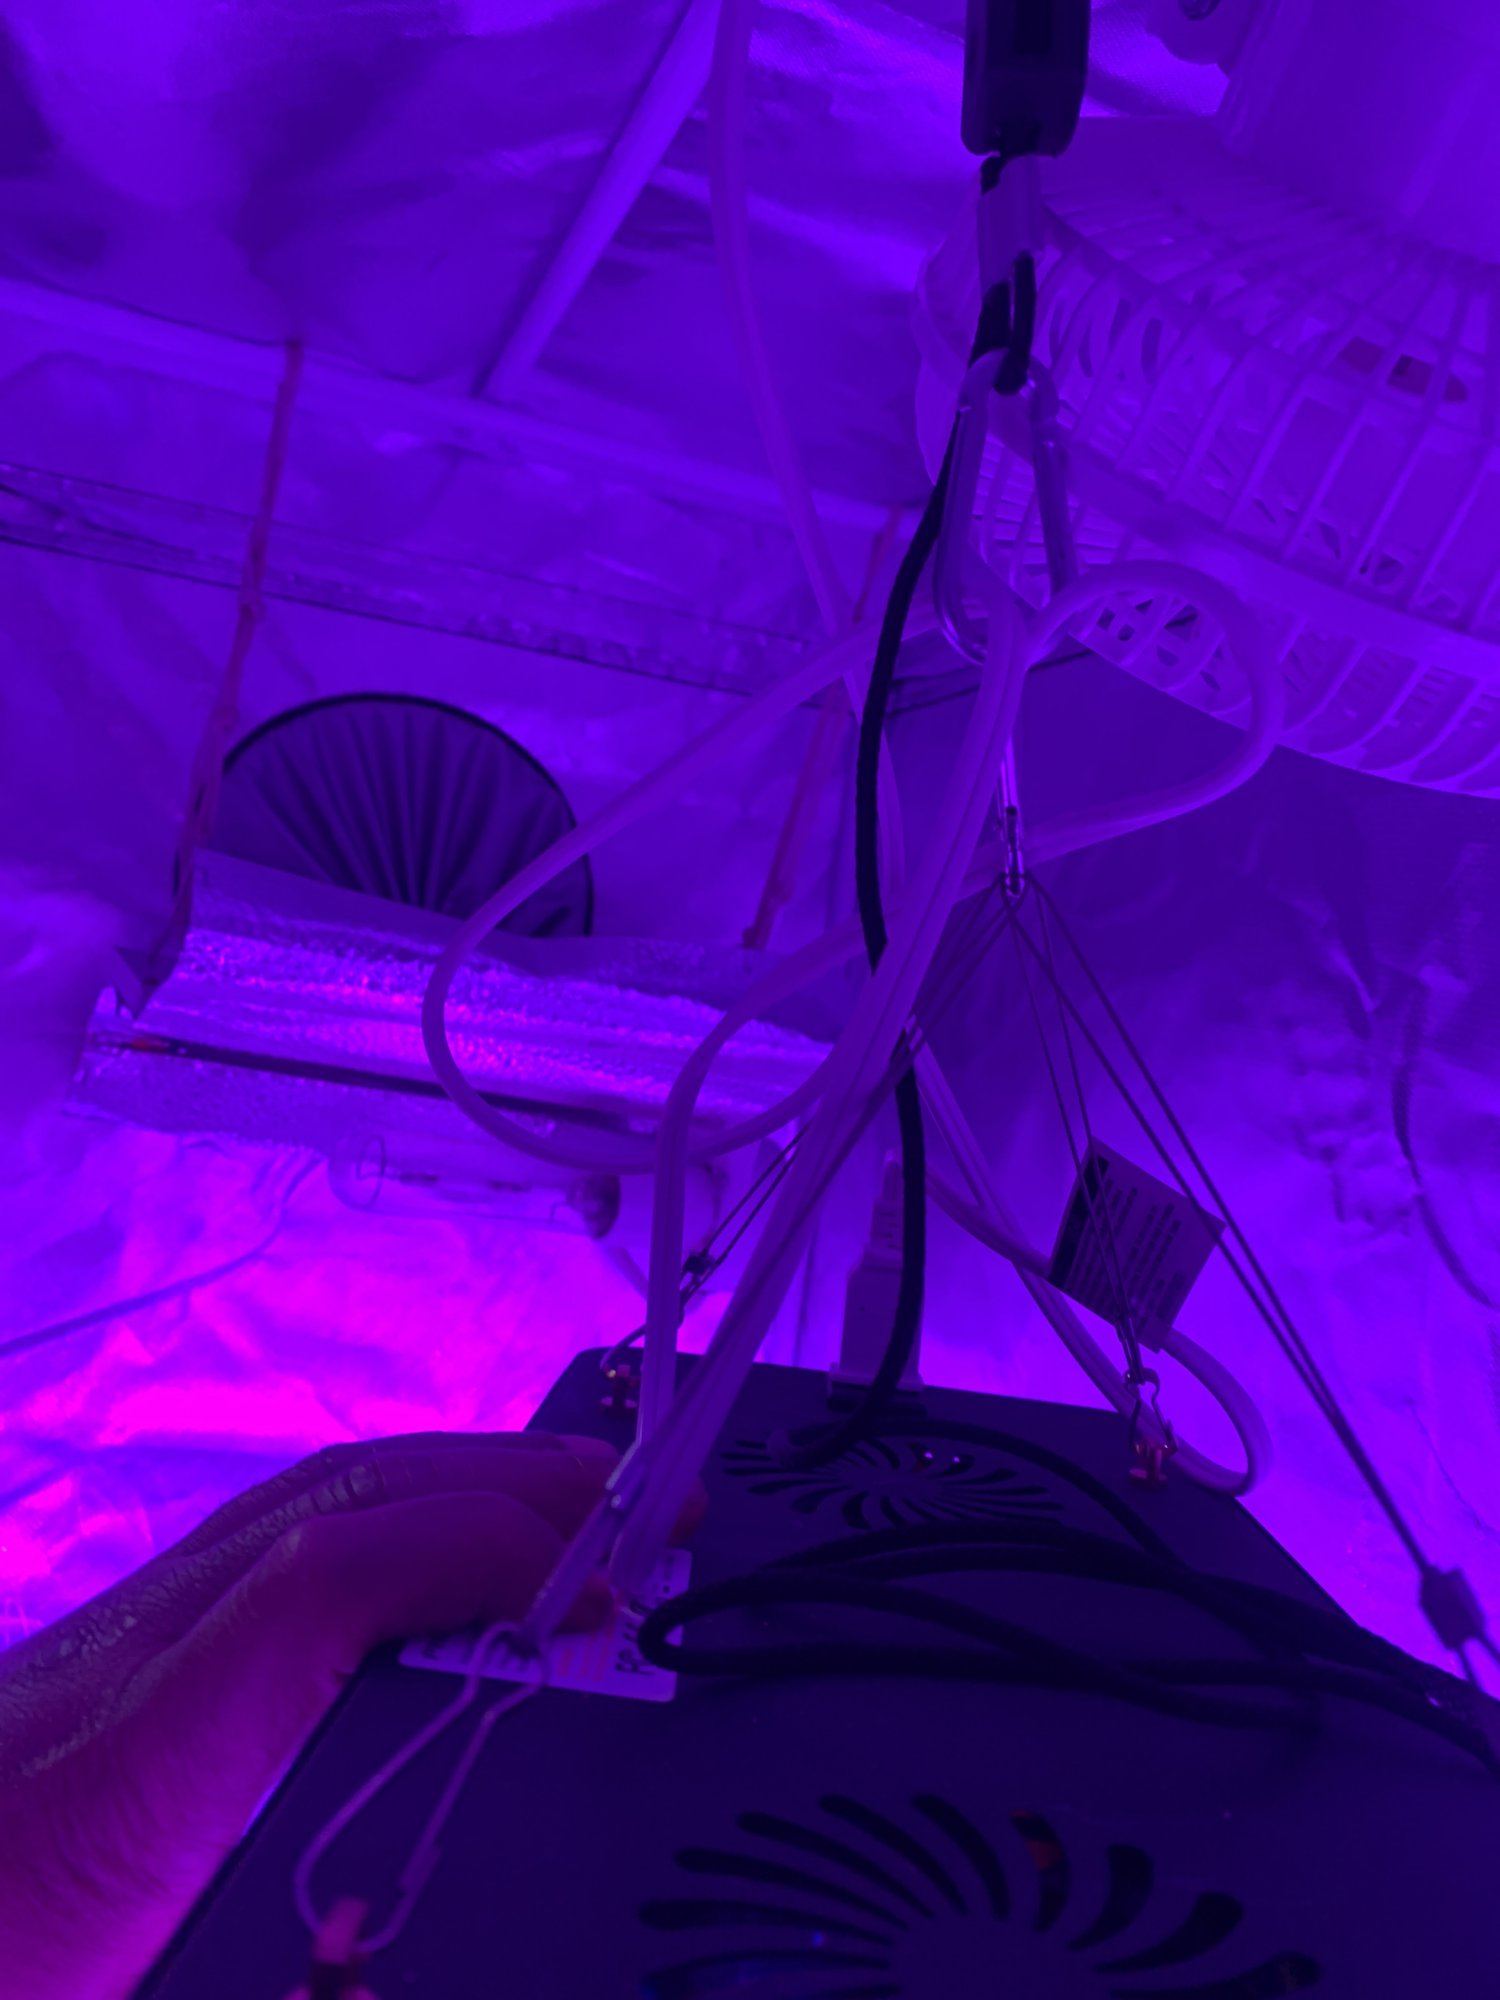 Is it ok to use a 150 hps grow light and a 100 watt led  amazon bought  grow light  durning th